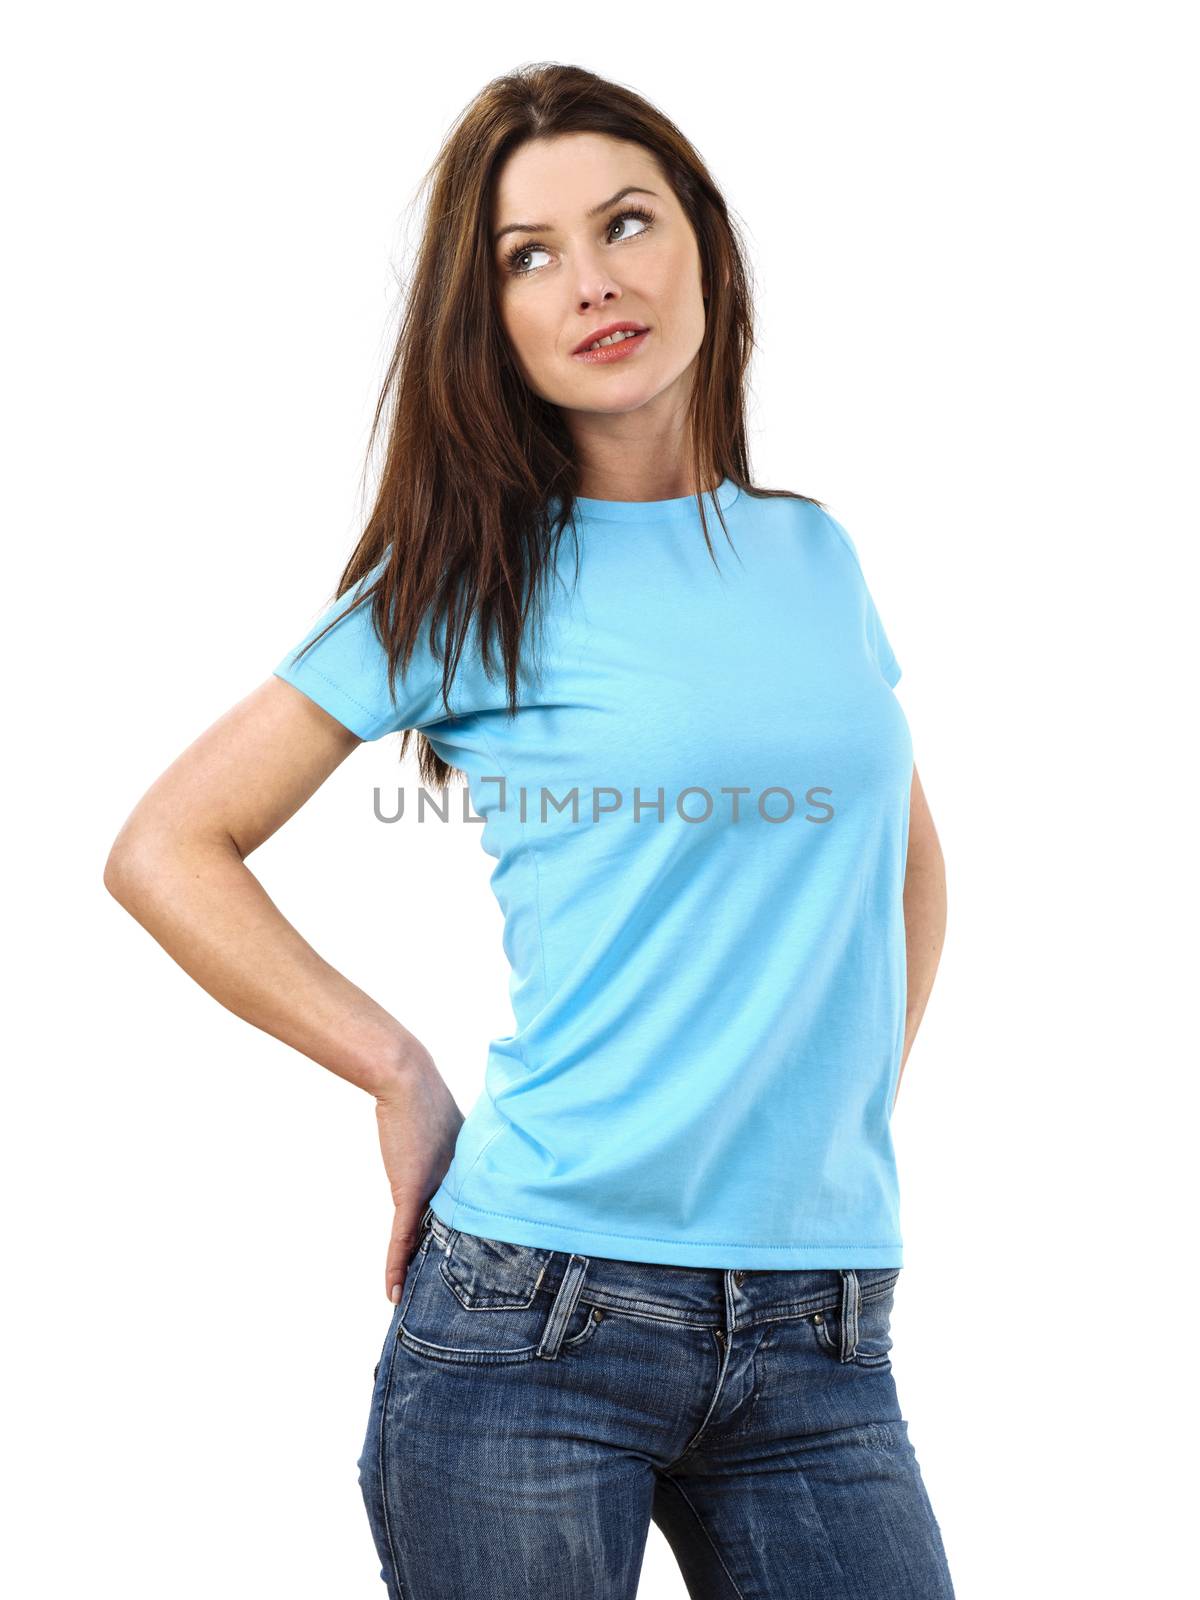 Sexy woman wearing blank light blue shirt by sumners